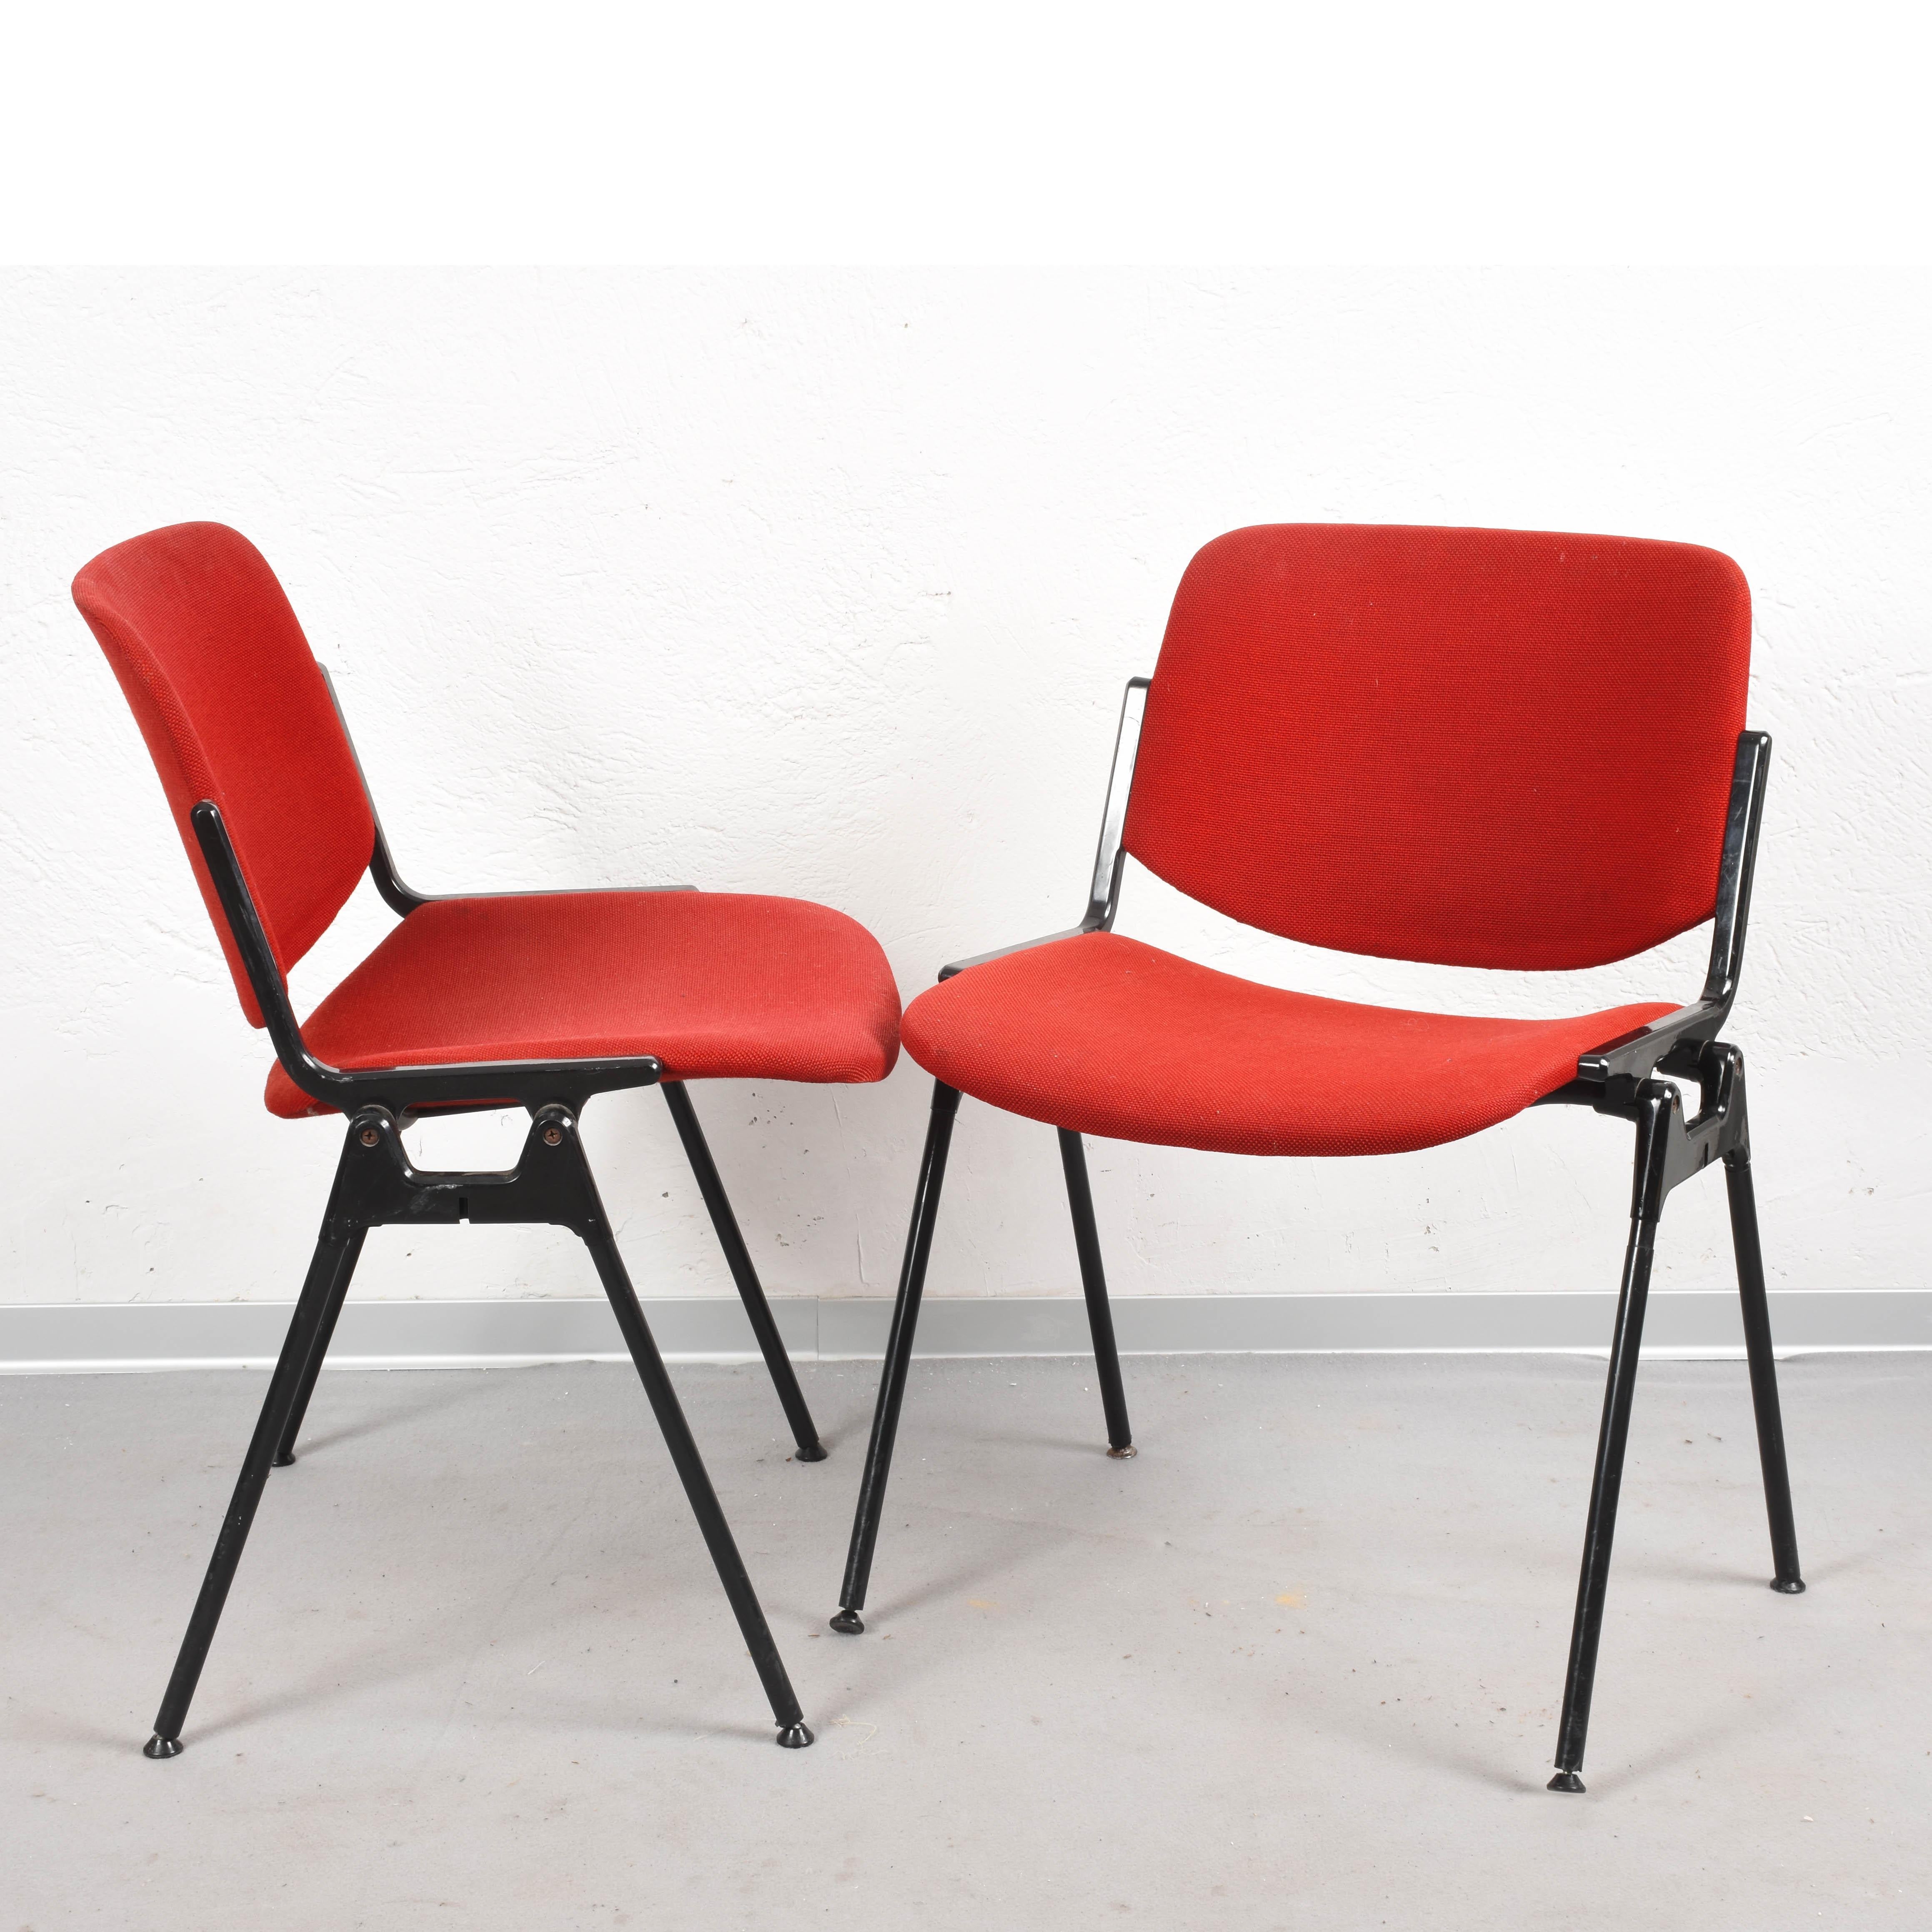 Late 20th Century Pair of Red Chair DSC 106 Giancarlo Piretti for Castelli Aluminum, Italy, 1960s For Sale